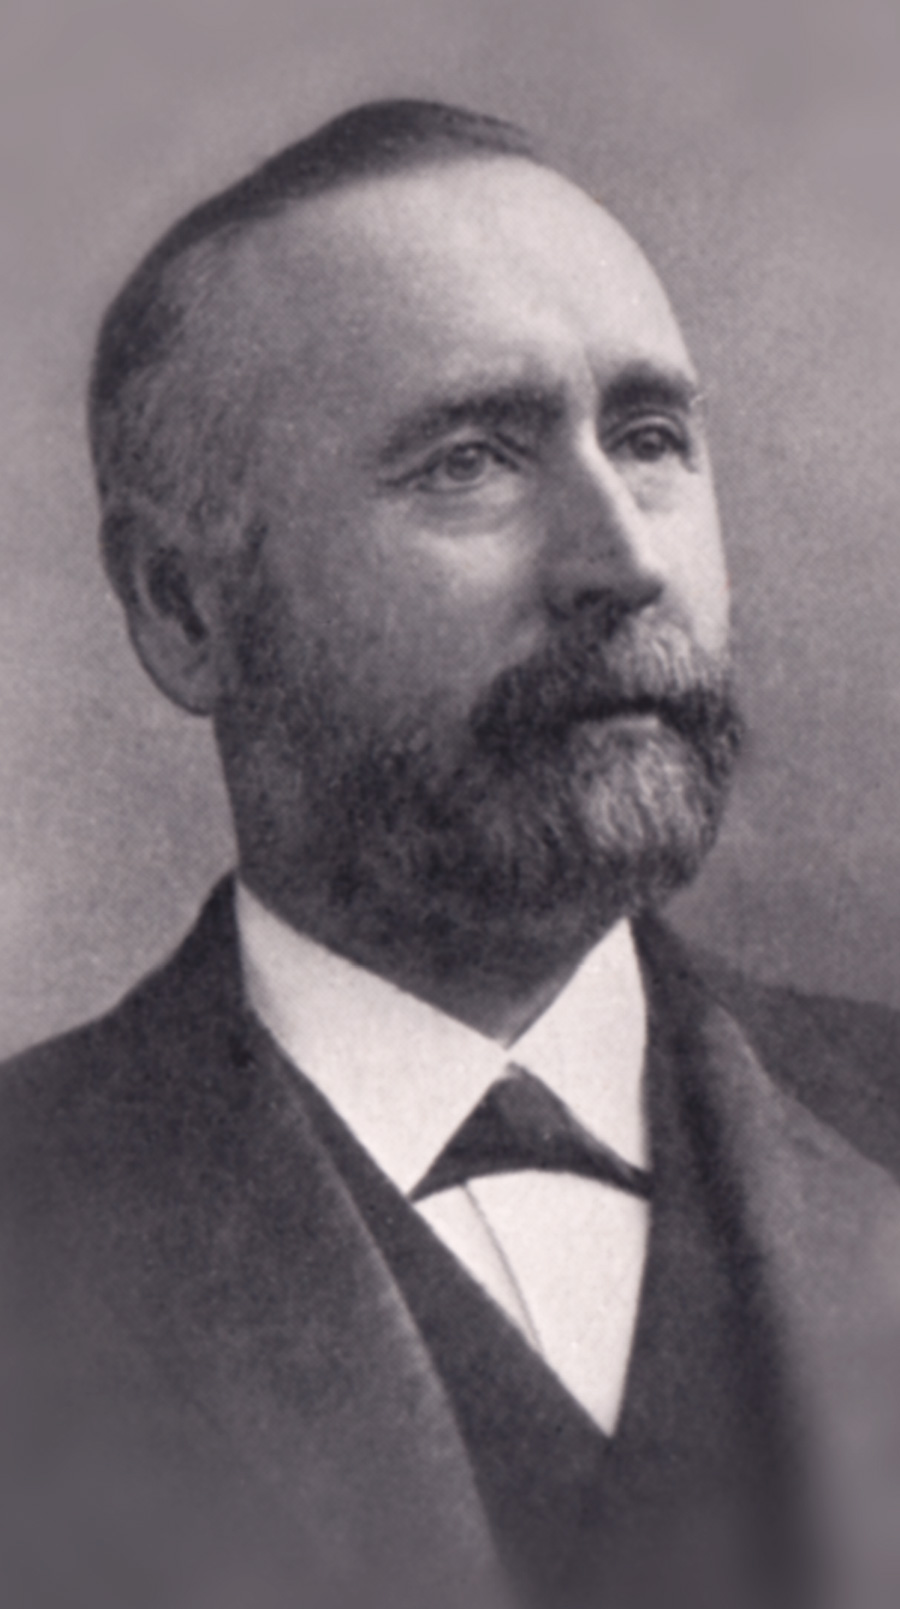 William Pirrie pictured in 1903